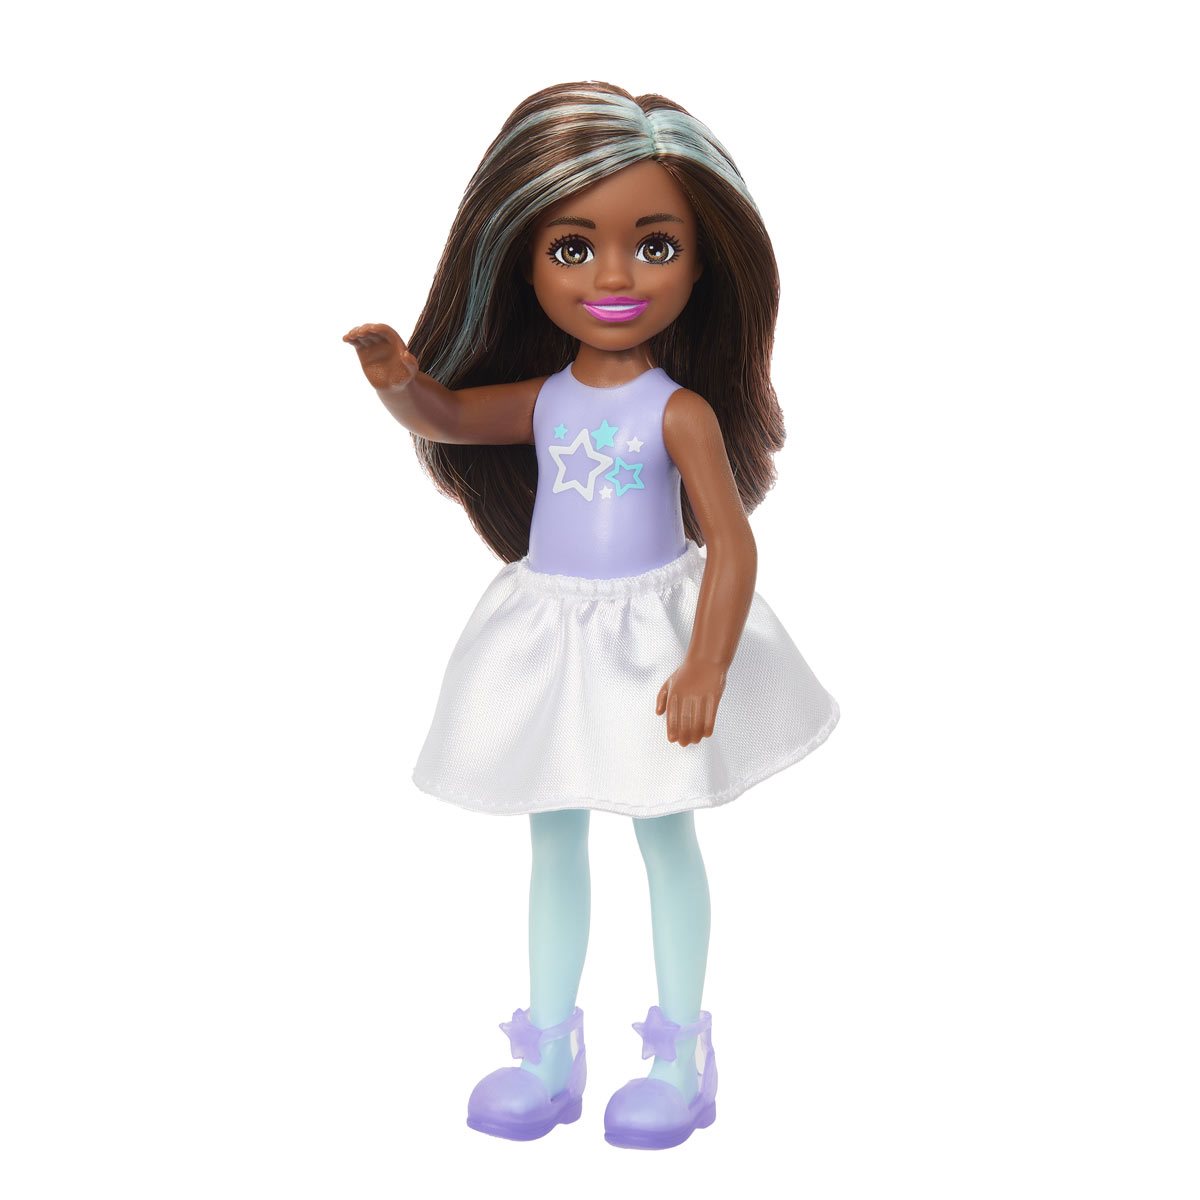 Barbie Cutie Reveal Costume-Themed Series Doll & Accessories with